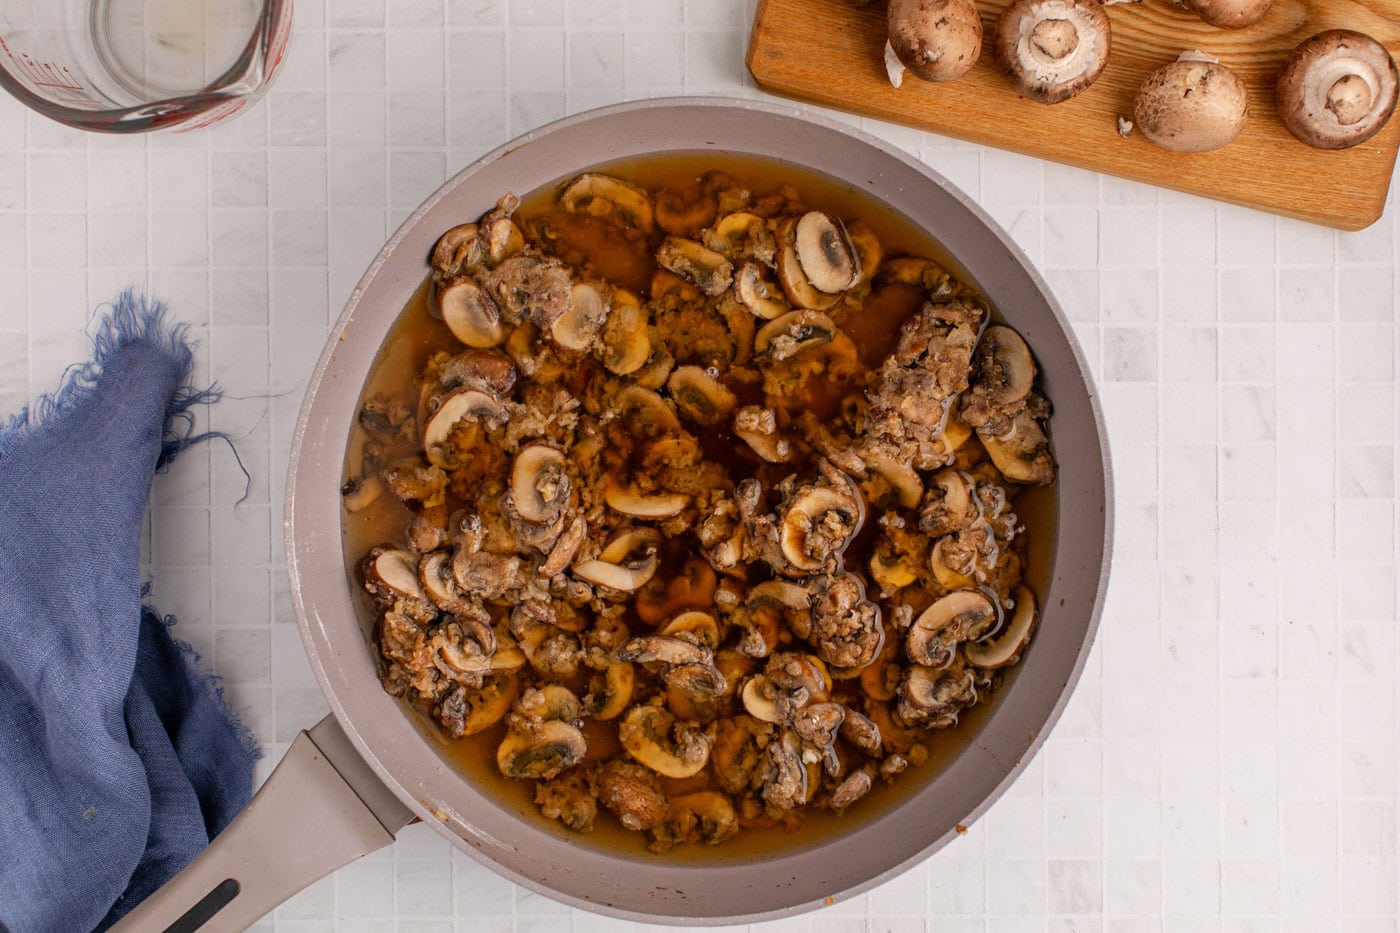 beef broth and Worcestershire sauce added to mushroom sauce in skillet